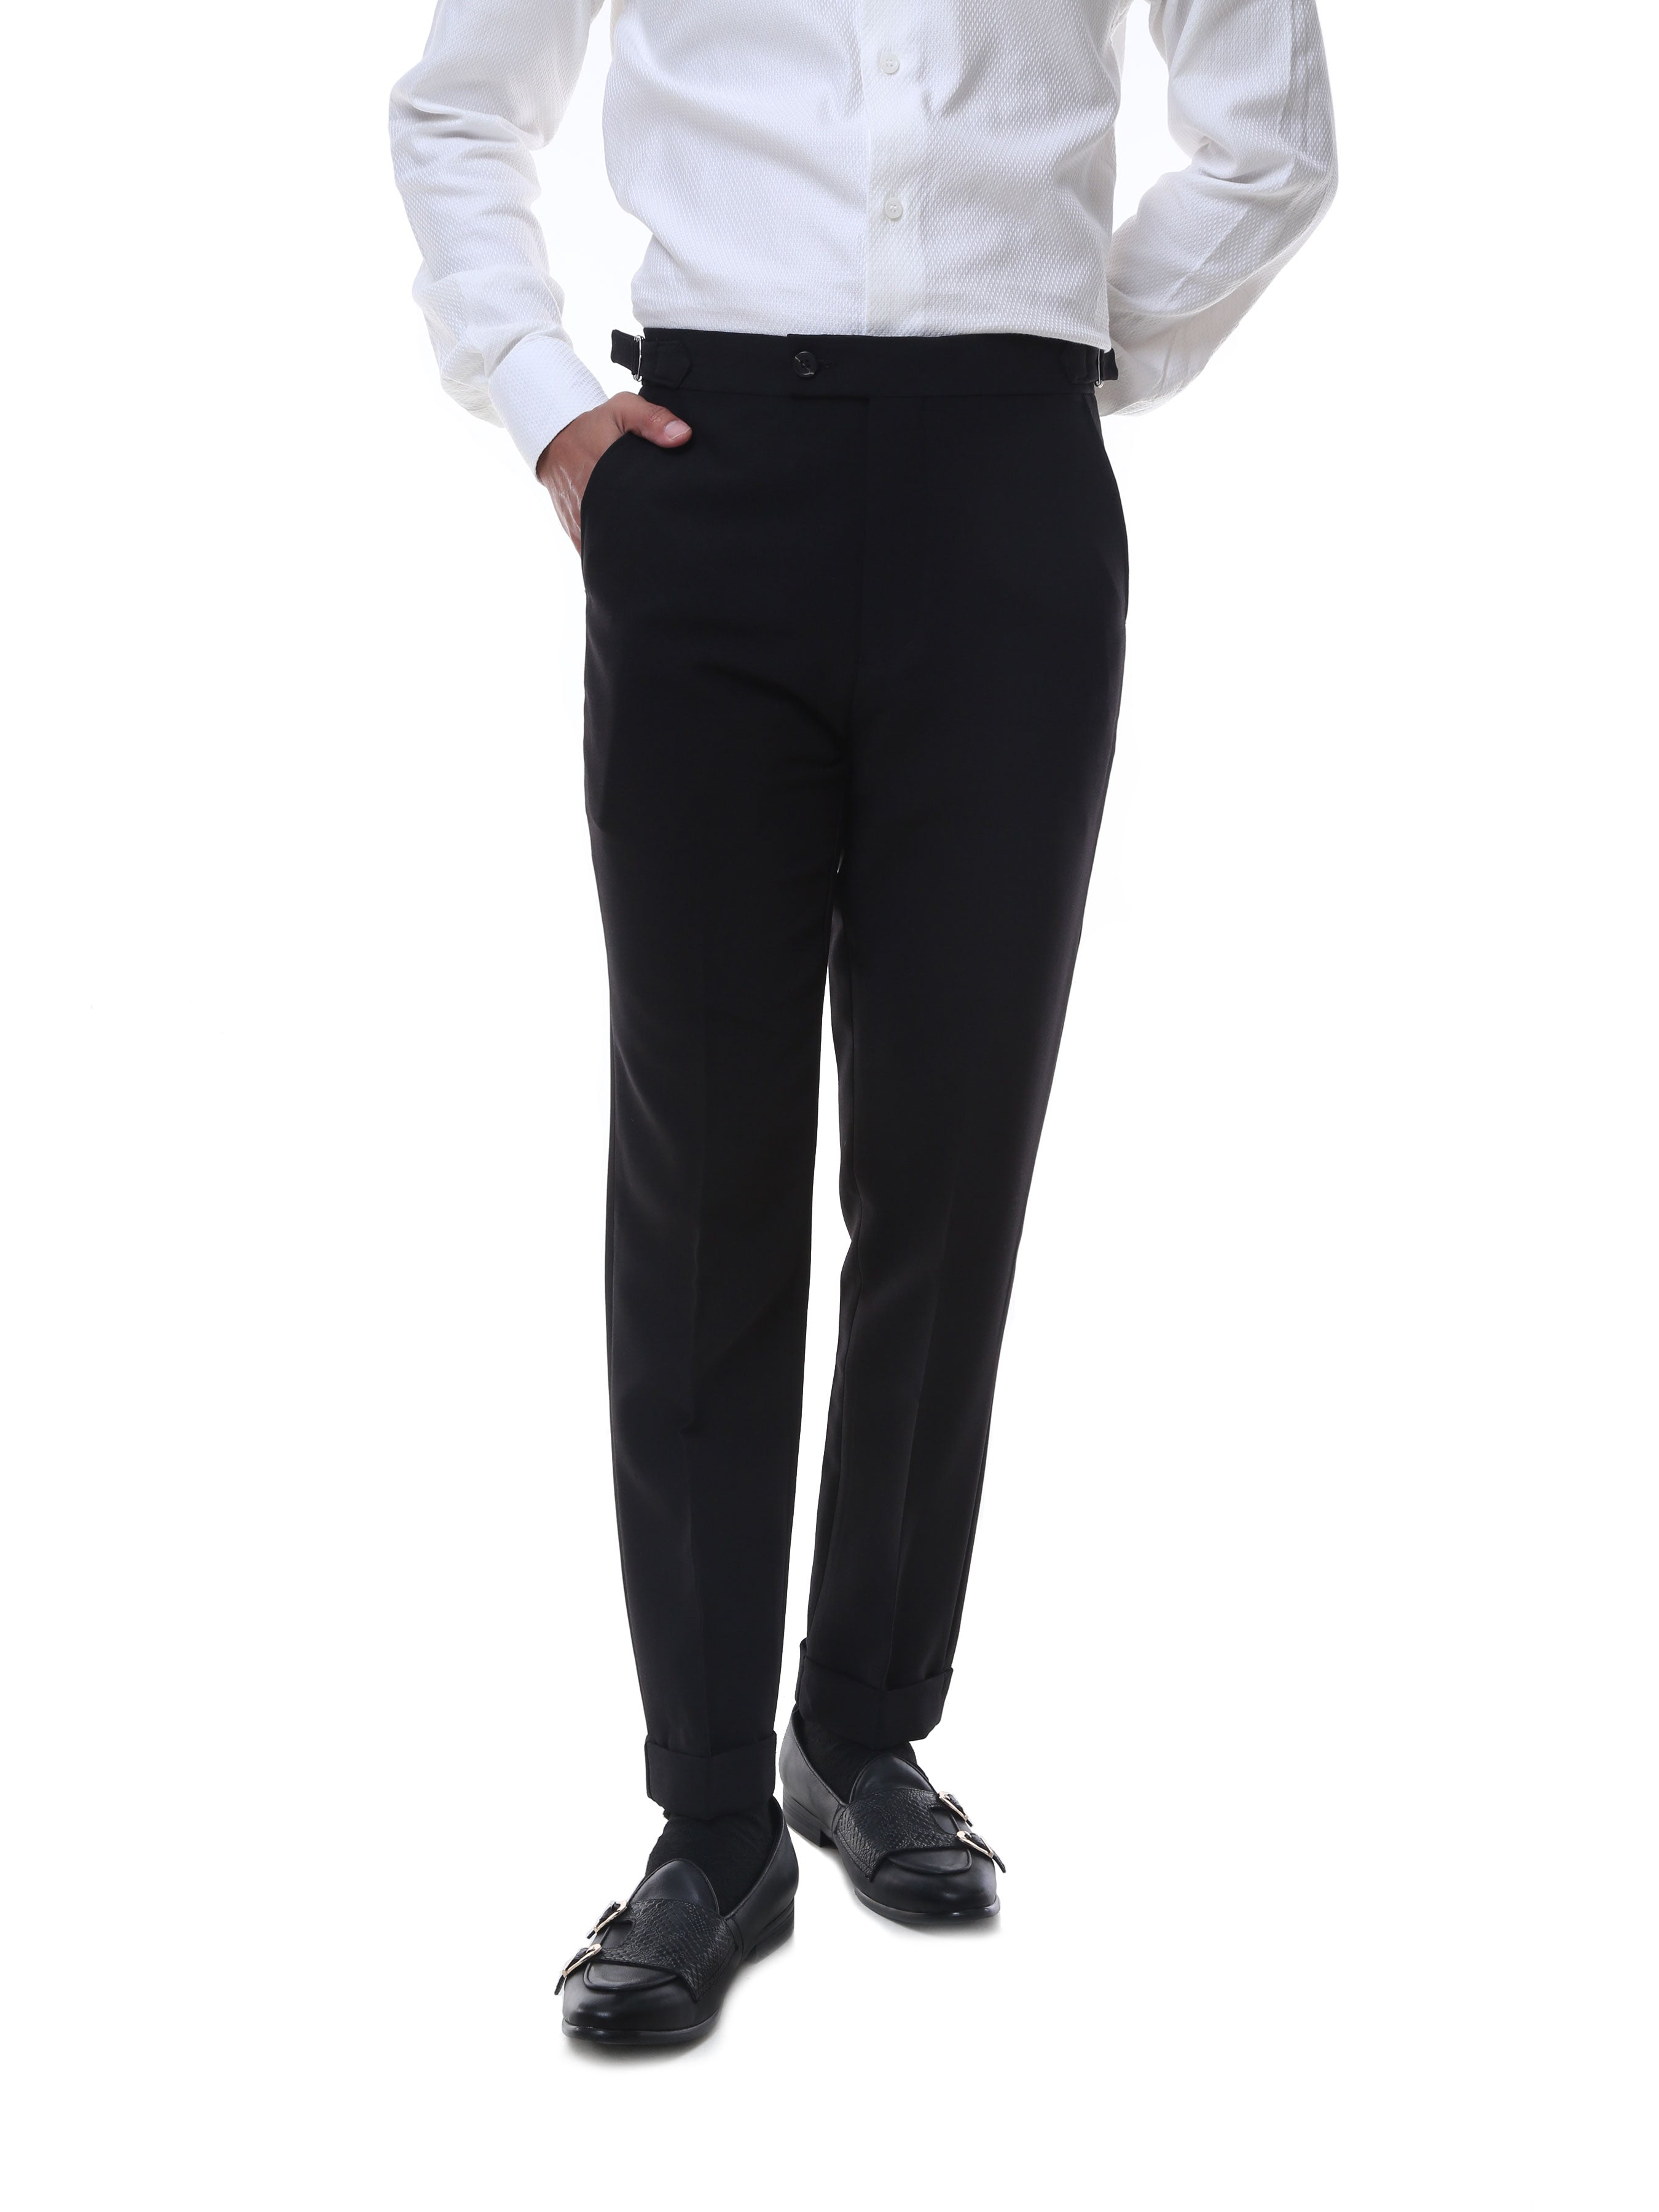 Trousers With Side Adjusters - Black Plain Cuffed (Stretchable) - Zeve Shoes